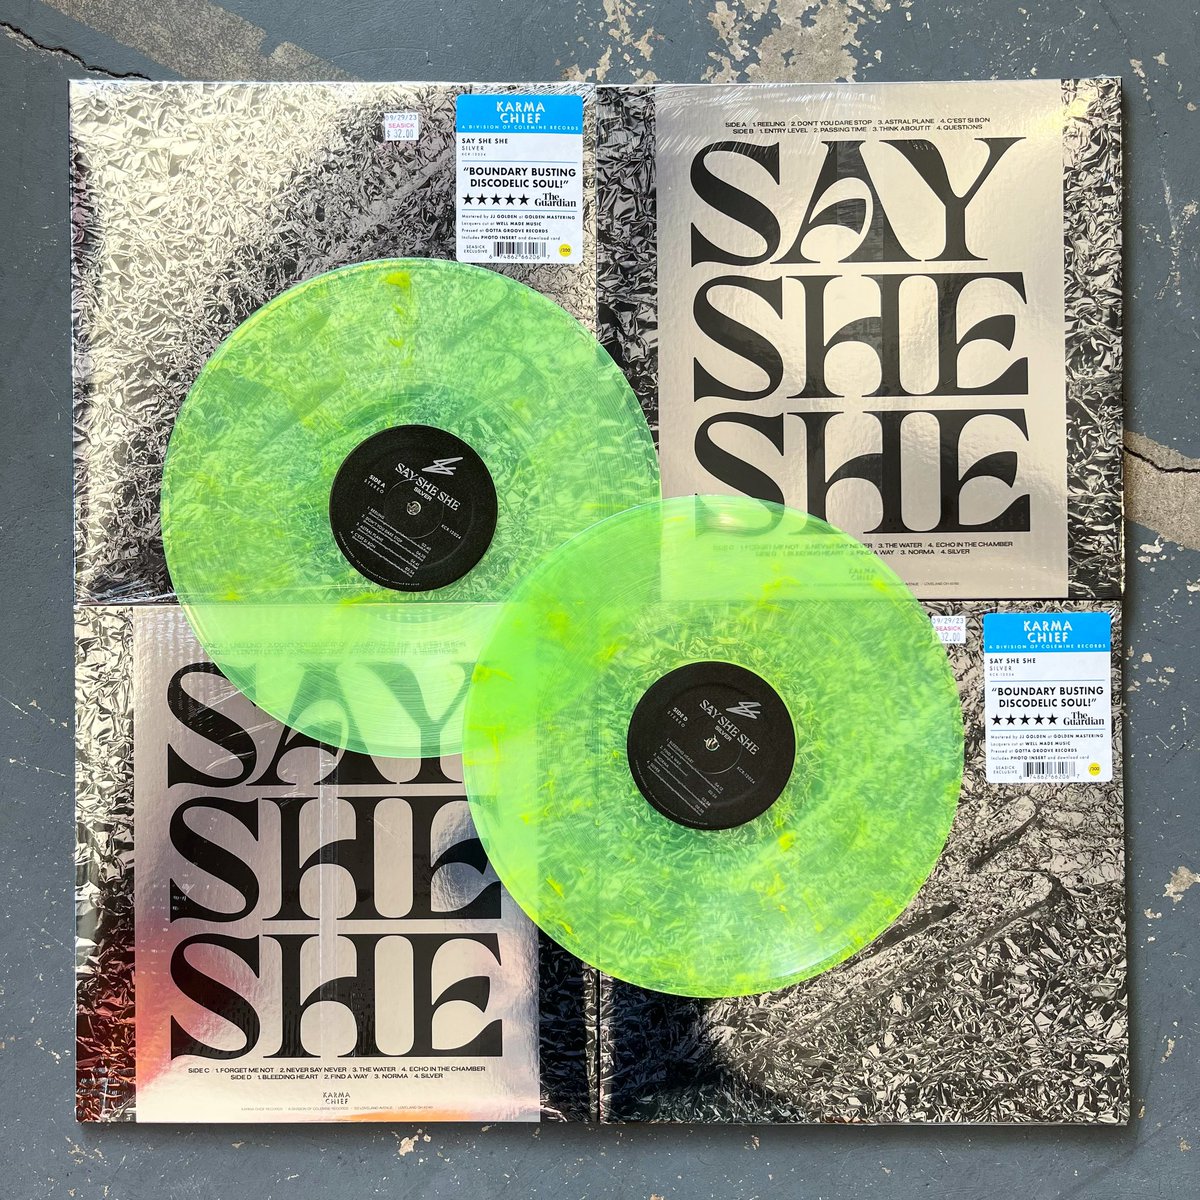 Say She She’s sophomore album ‘Silver’ is out today! We’re super stoked to have an exclusive color of the vinyl only available at Seasick. Grab a copy on limited coke bottle clear w/ yellow swirl vinyl. Only 300 copies of this version! @SaySheShe @ColemineRecords